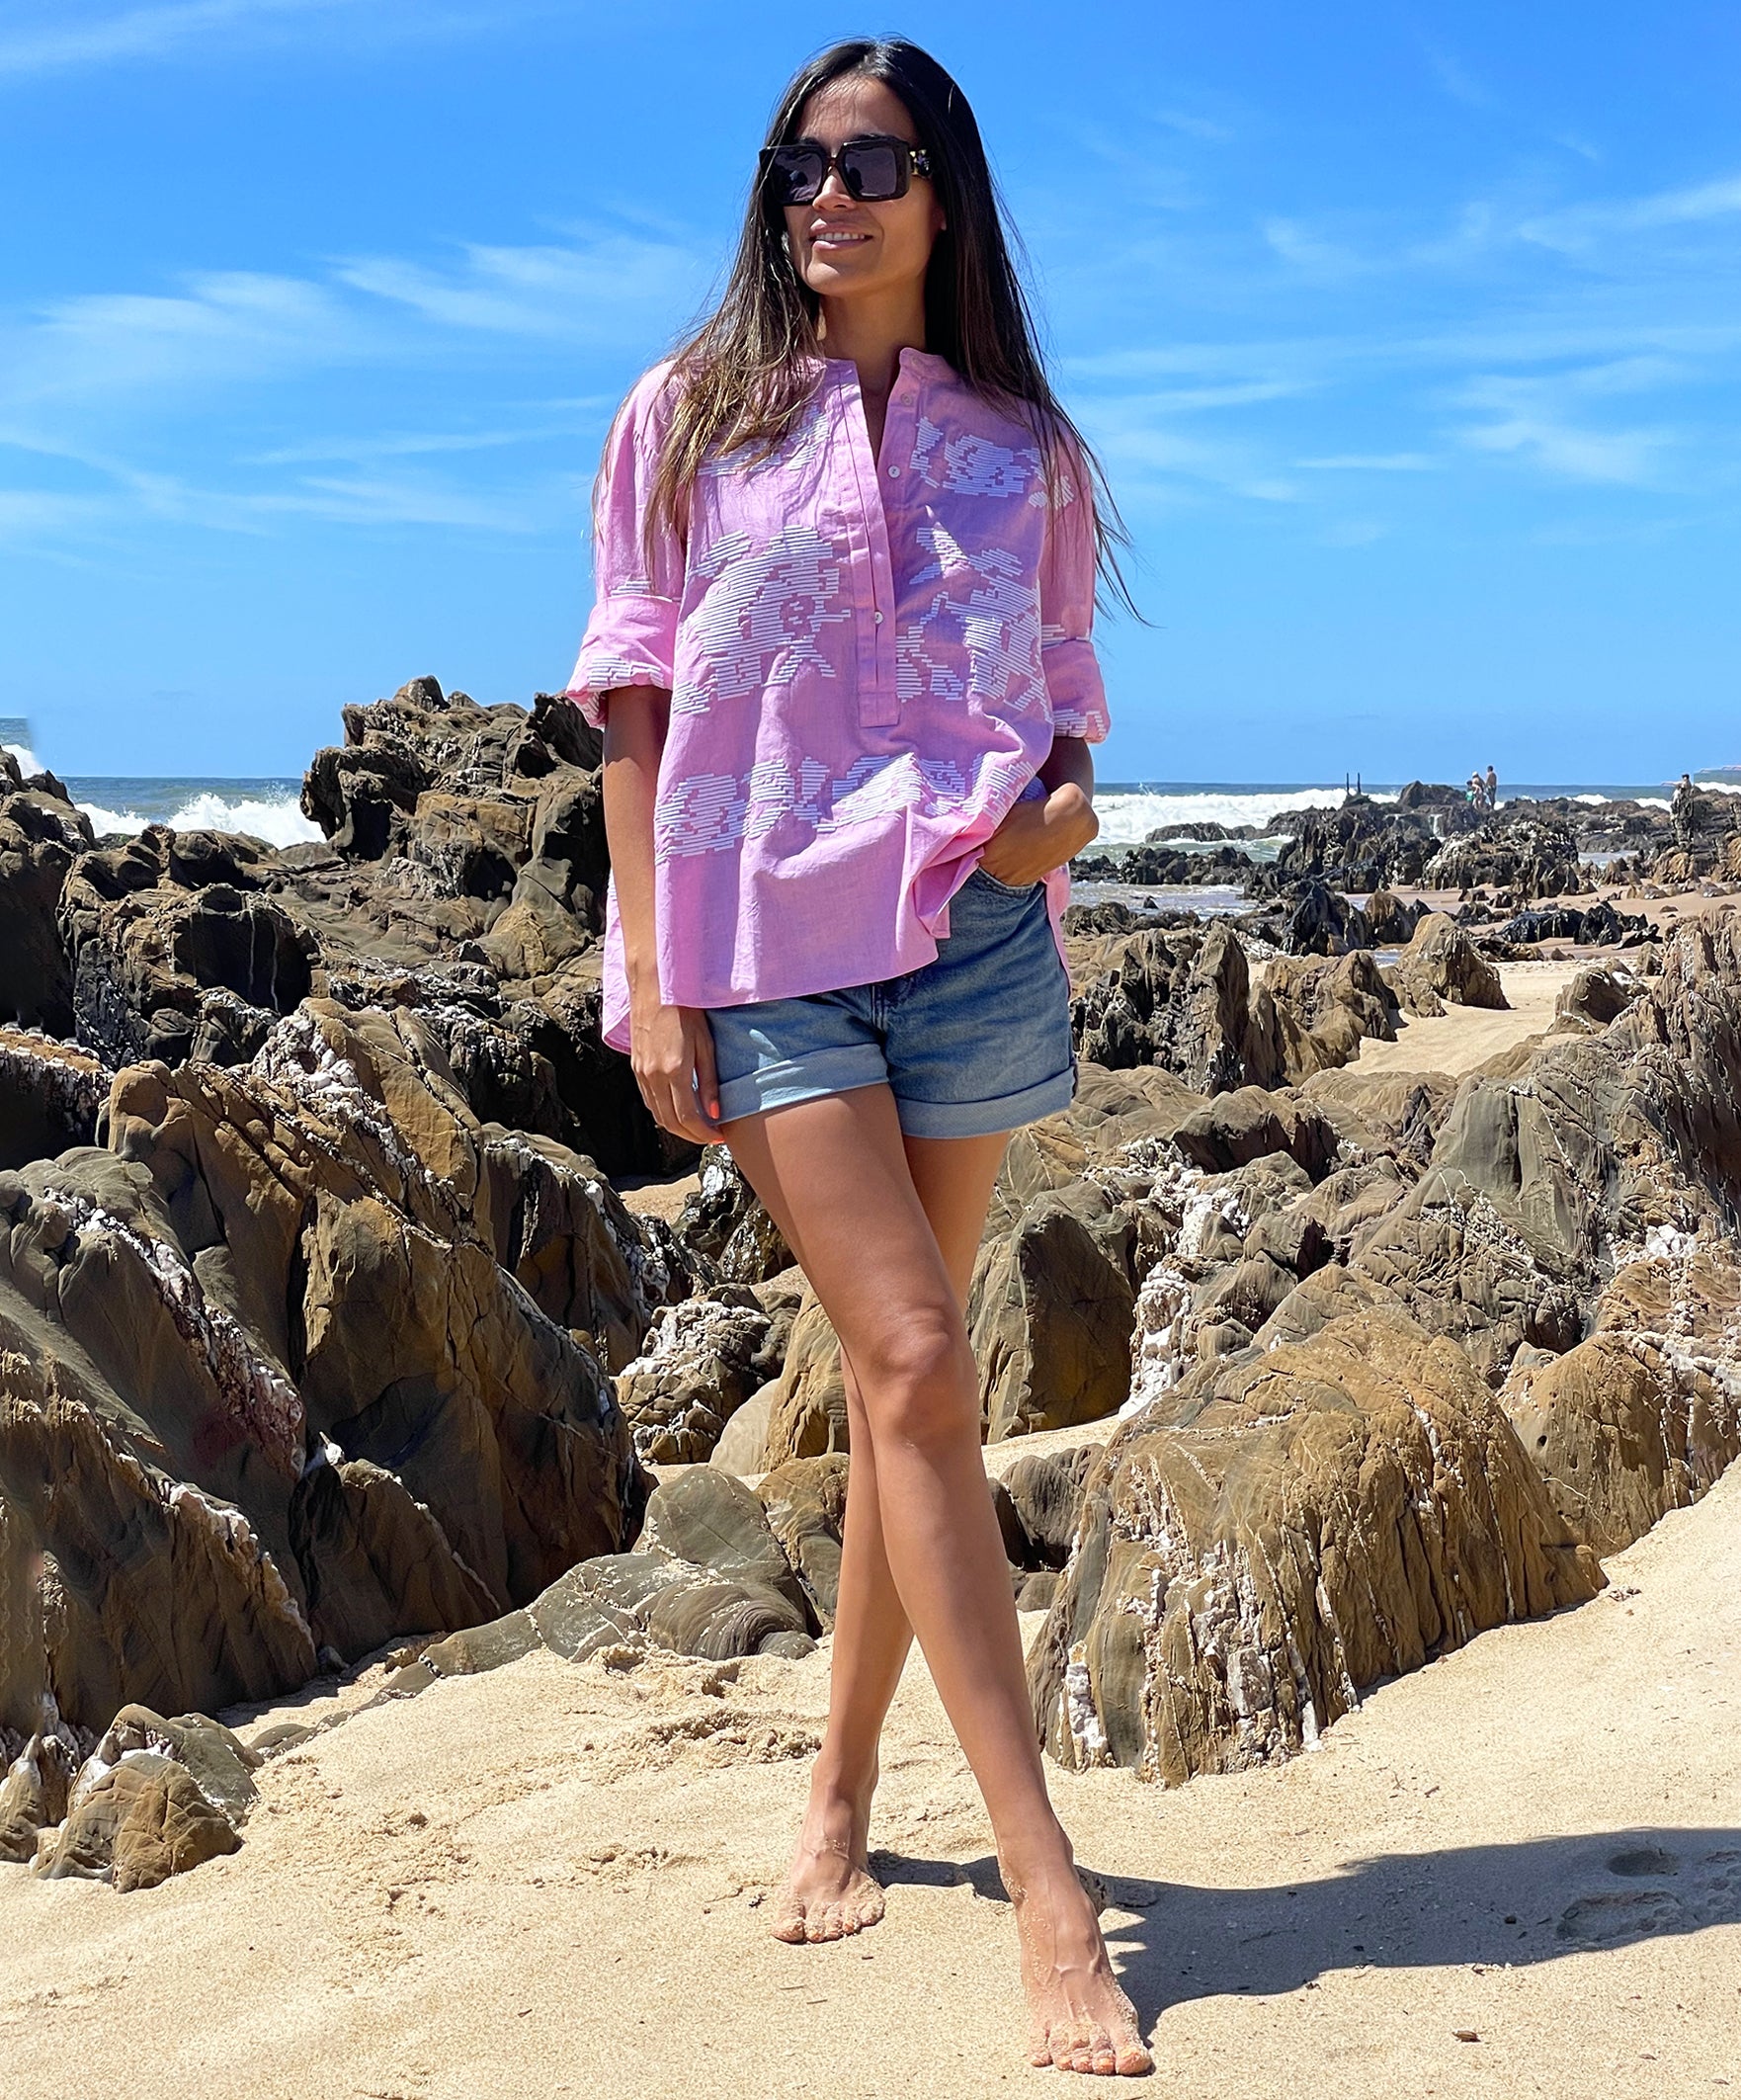 A model on a beach wearing a Rose and Rose pink Parma shirt, denim shorts and sunglasses. 